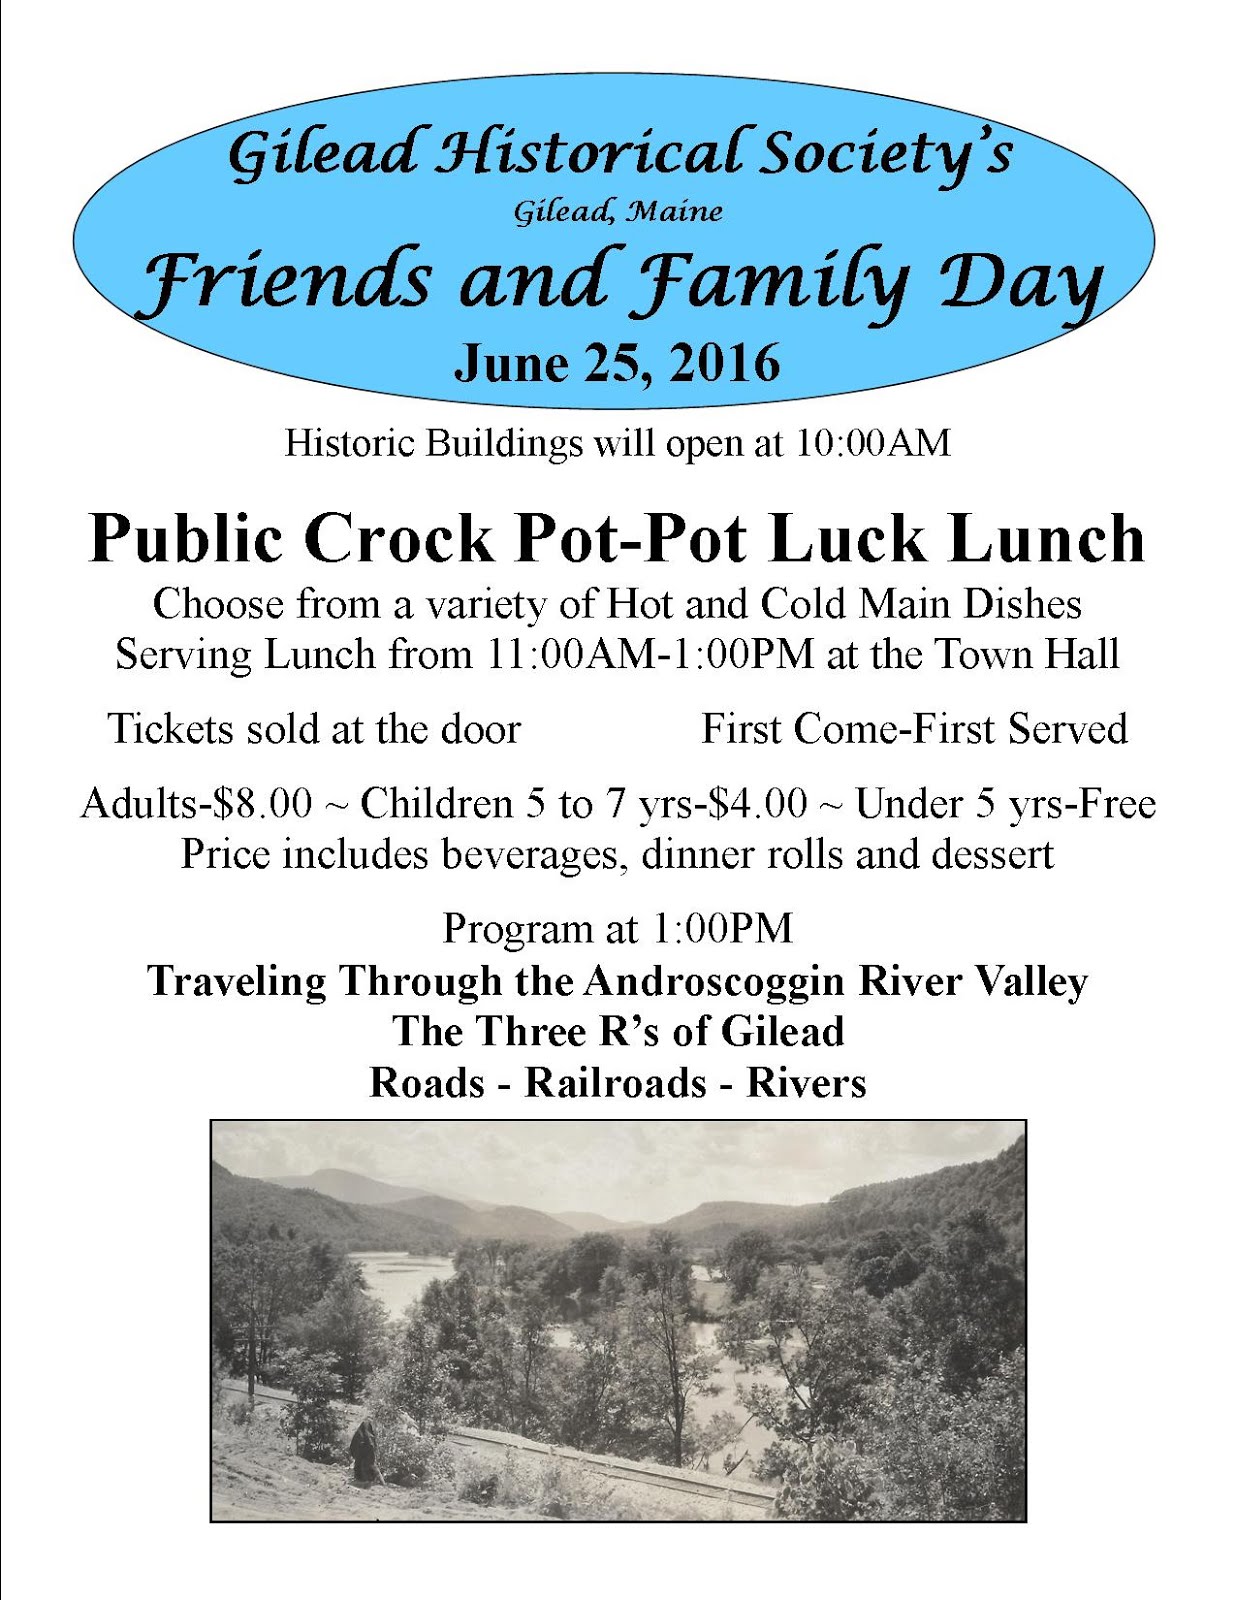 2016 Friends and Family Day